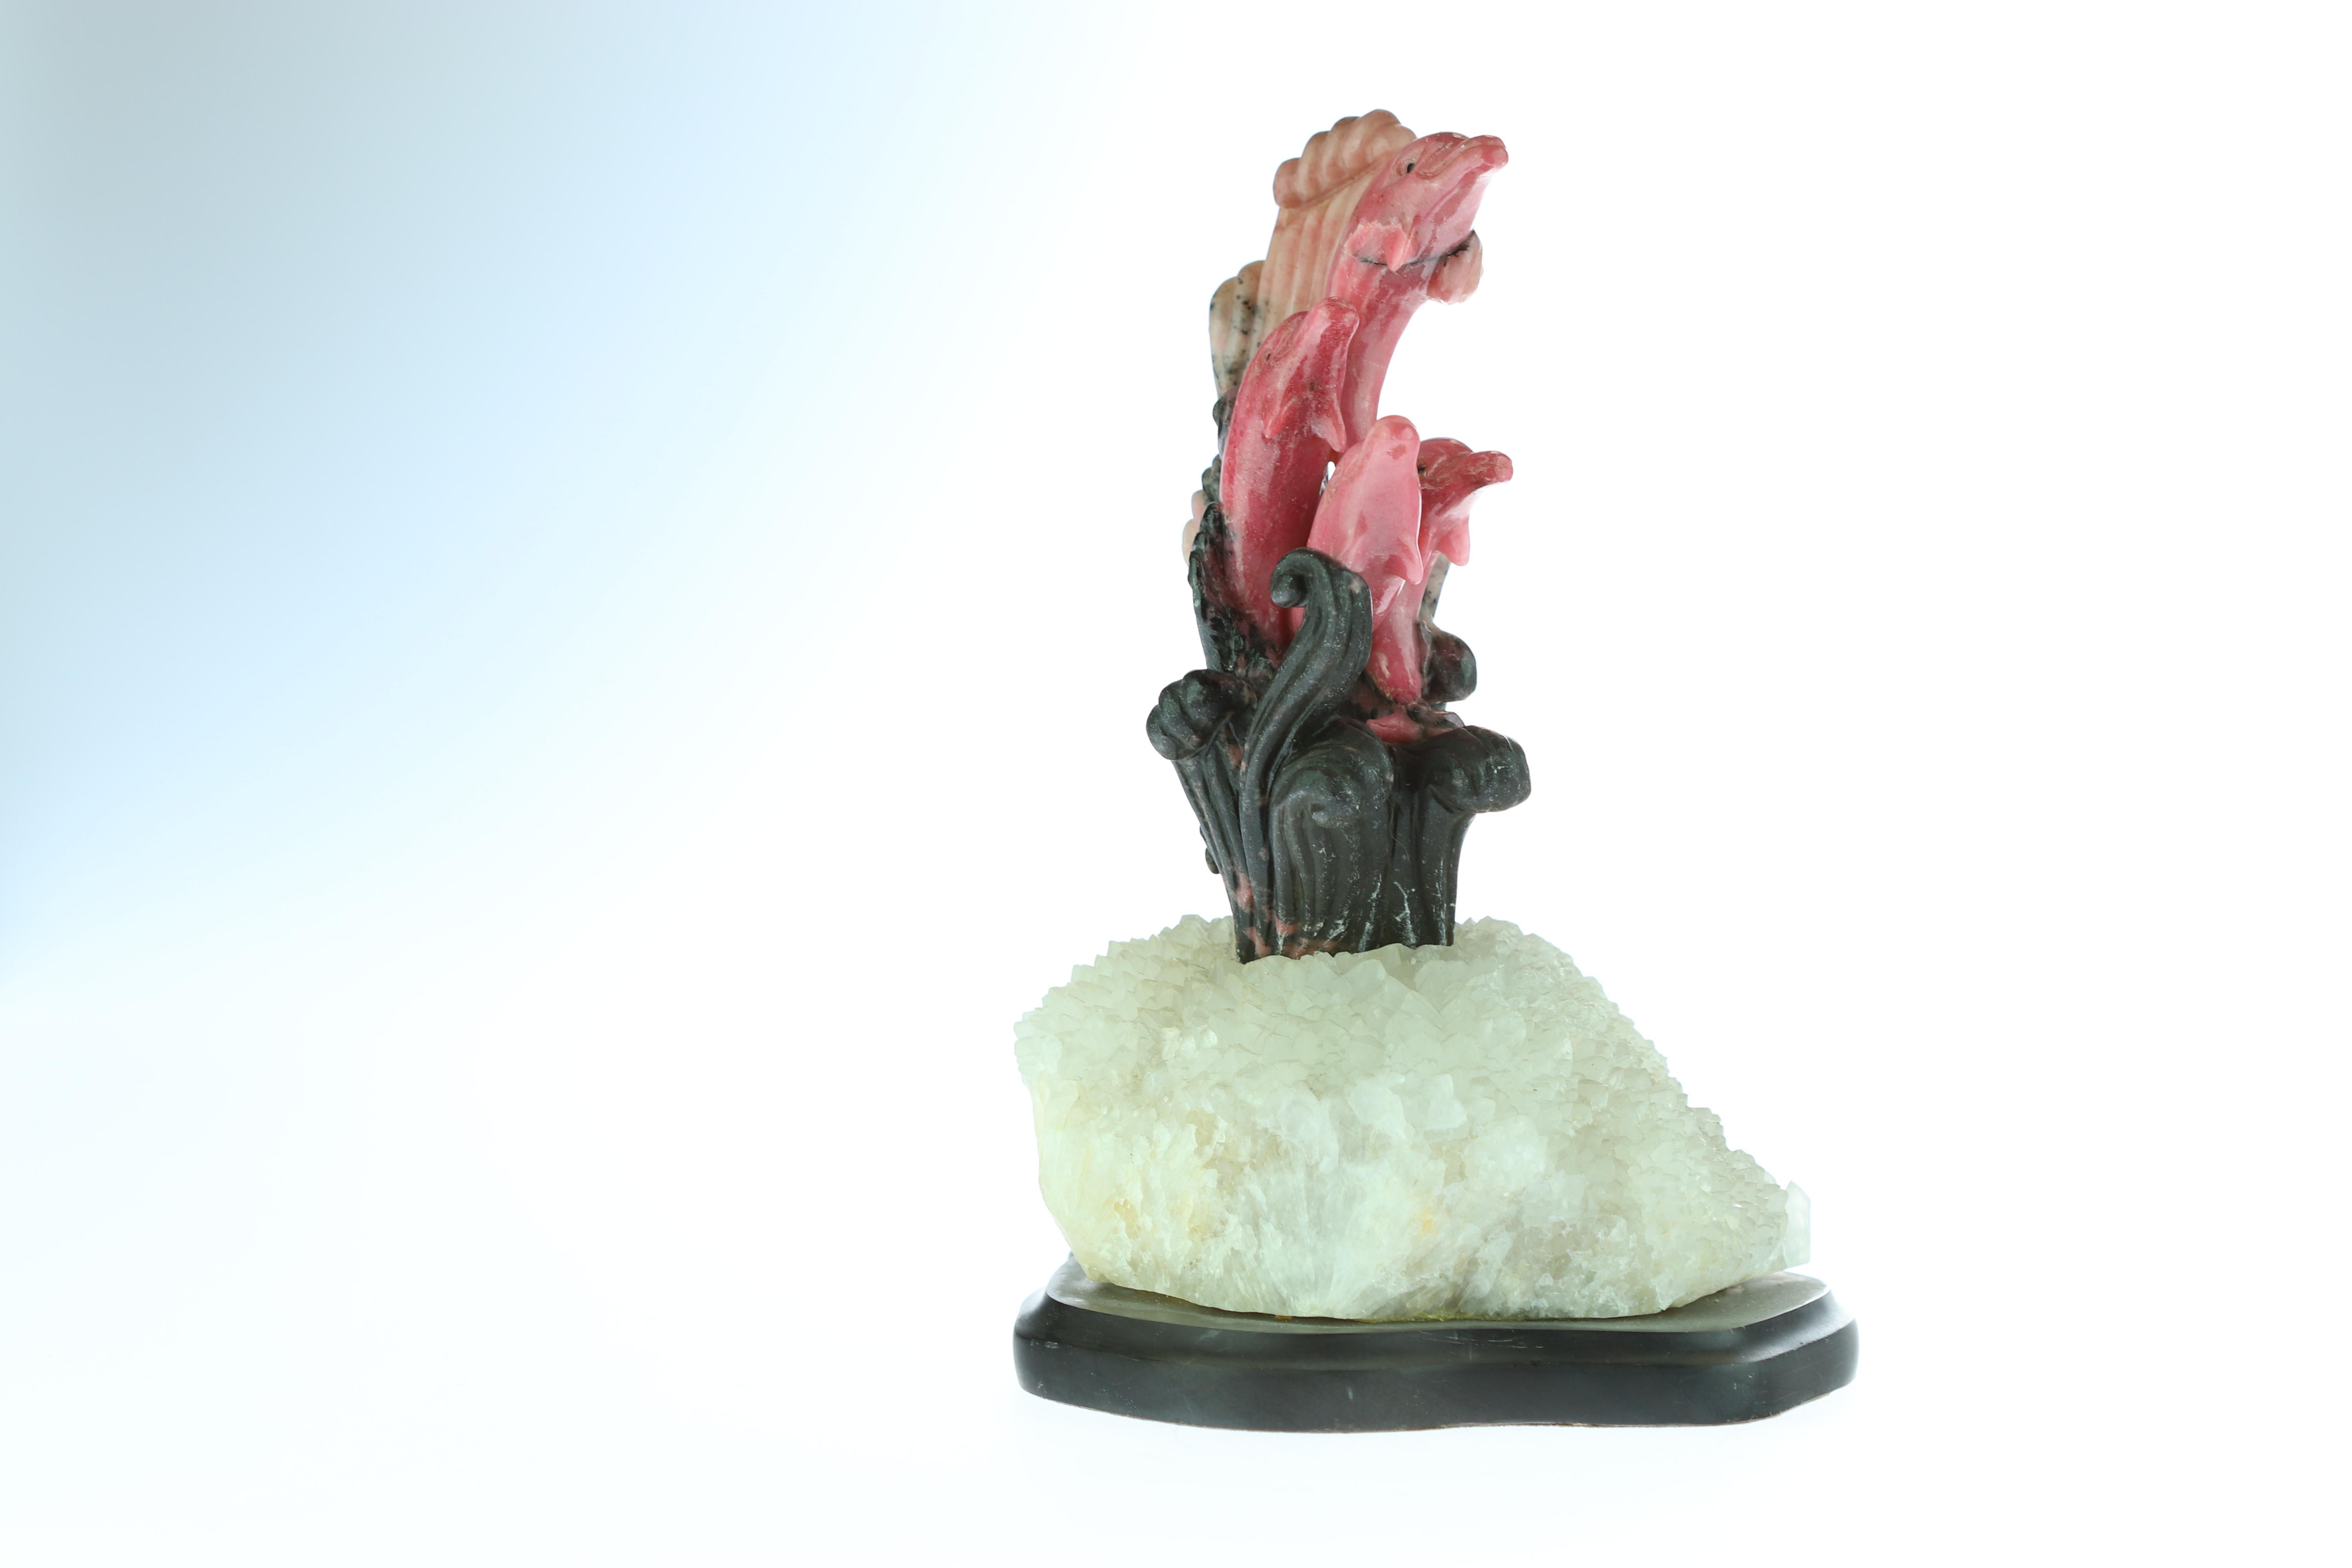 Hand-Carved Natural Rhodochrosite Dolphins Figurine Carved Animal Artisanal Statue Sculpture For Sale